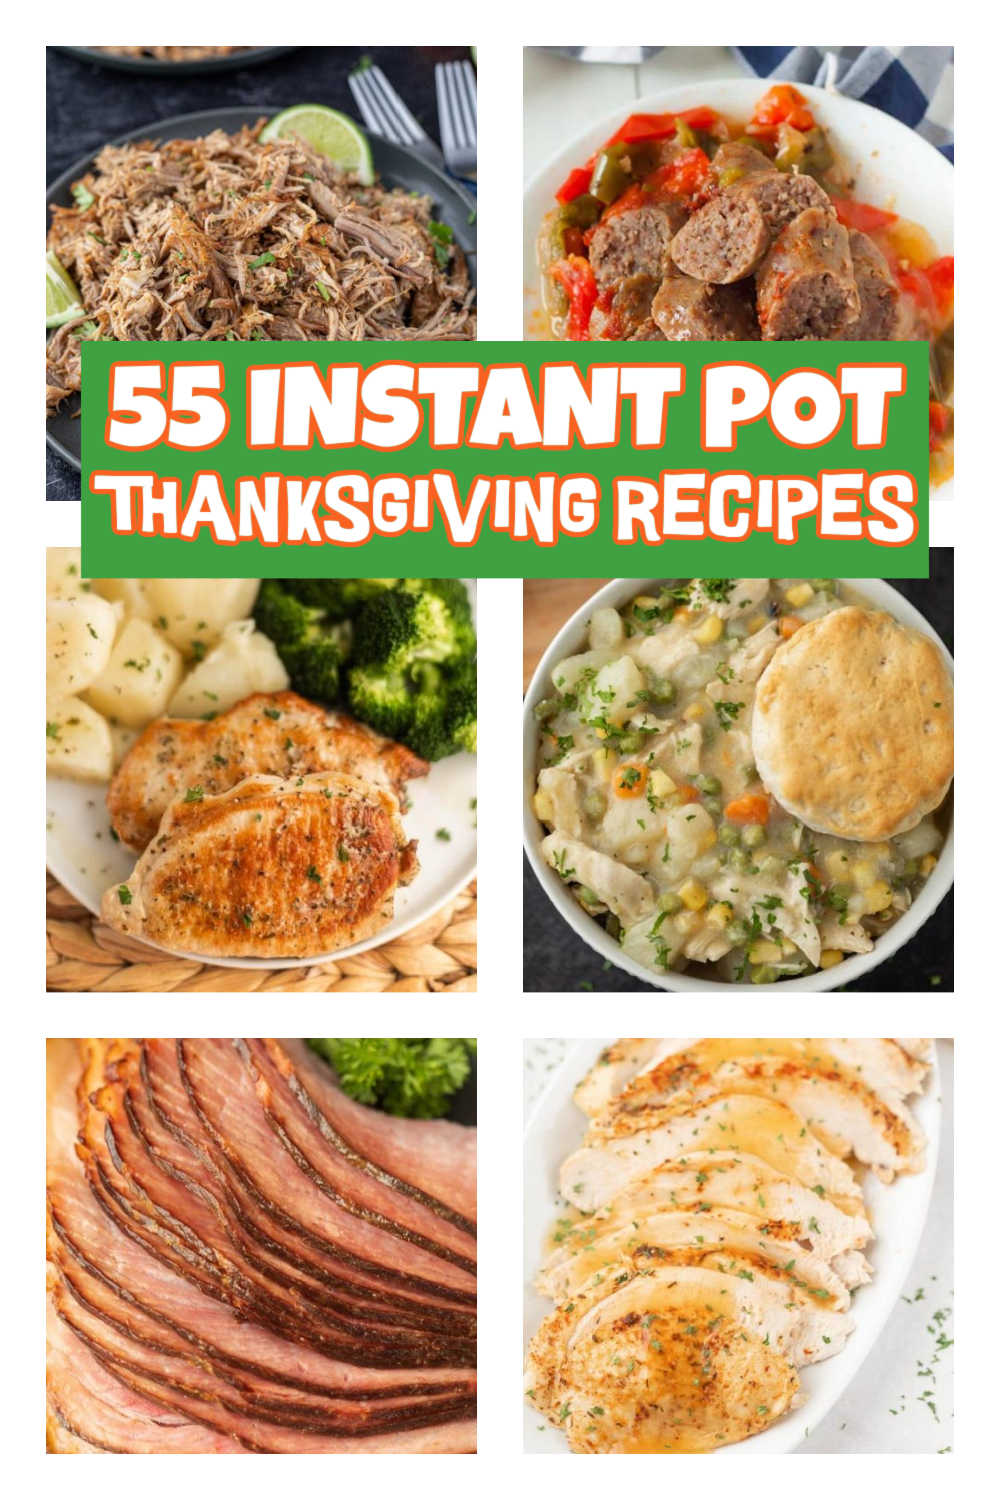 Save your time with these best instant pot Thanksgiving recipes. These 55 Thanksgiving instant pot recipes that are all quick and easy. From traditional Thanksgiving meals to other creative recipes that you will want to try, we have it all! #eatingonadime #instantpotthanksgivingrecipes #thanksgivingrecipes #instantpot